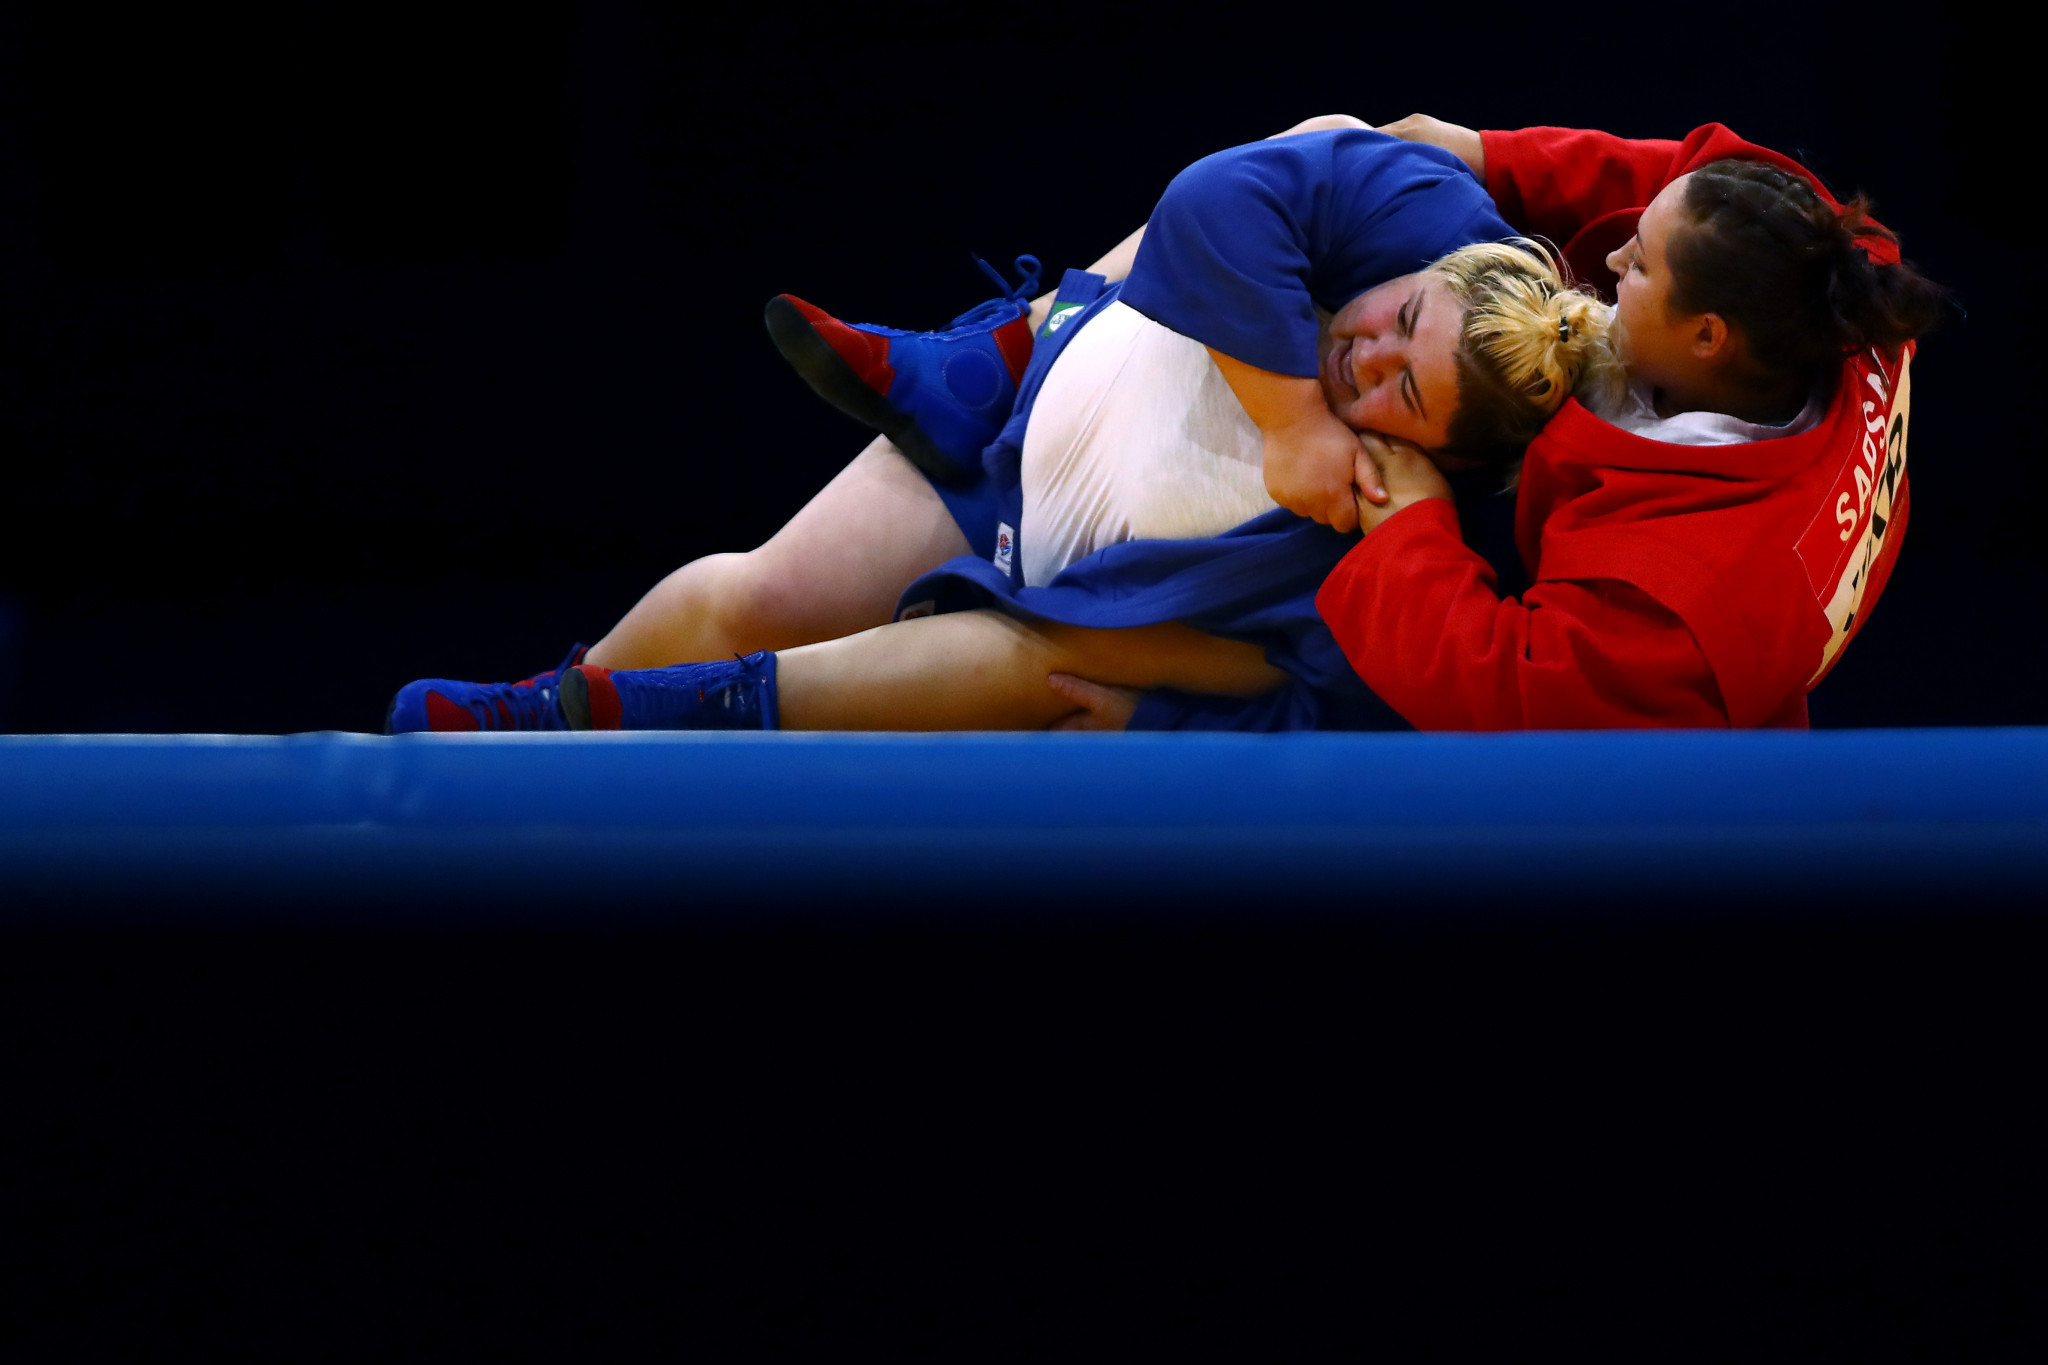 Competition continues tomorrow with the first medals set to be awarded in wrestling ©Getty Images